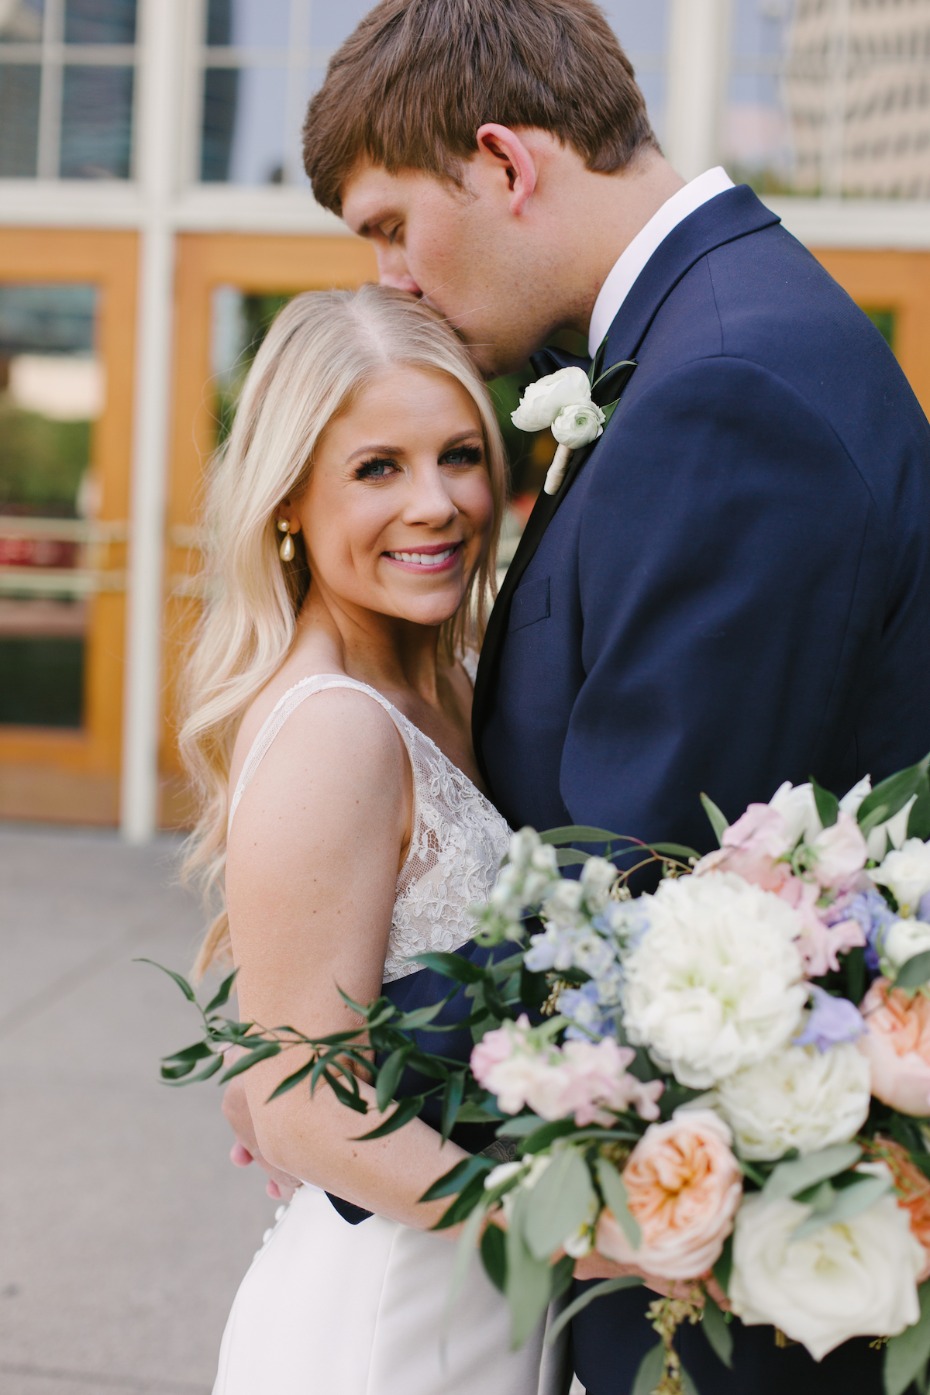 Lavender White And Gold Wedding In A Train Station